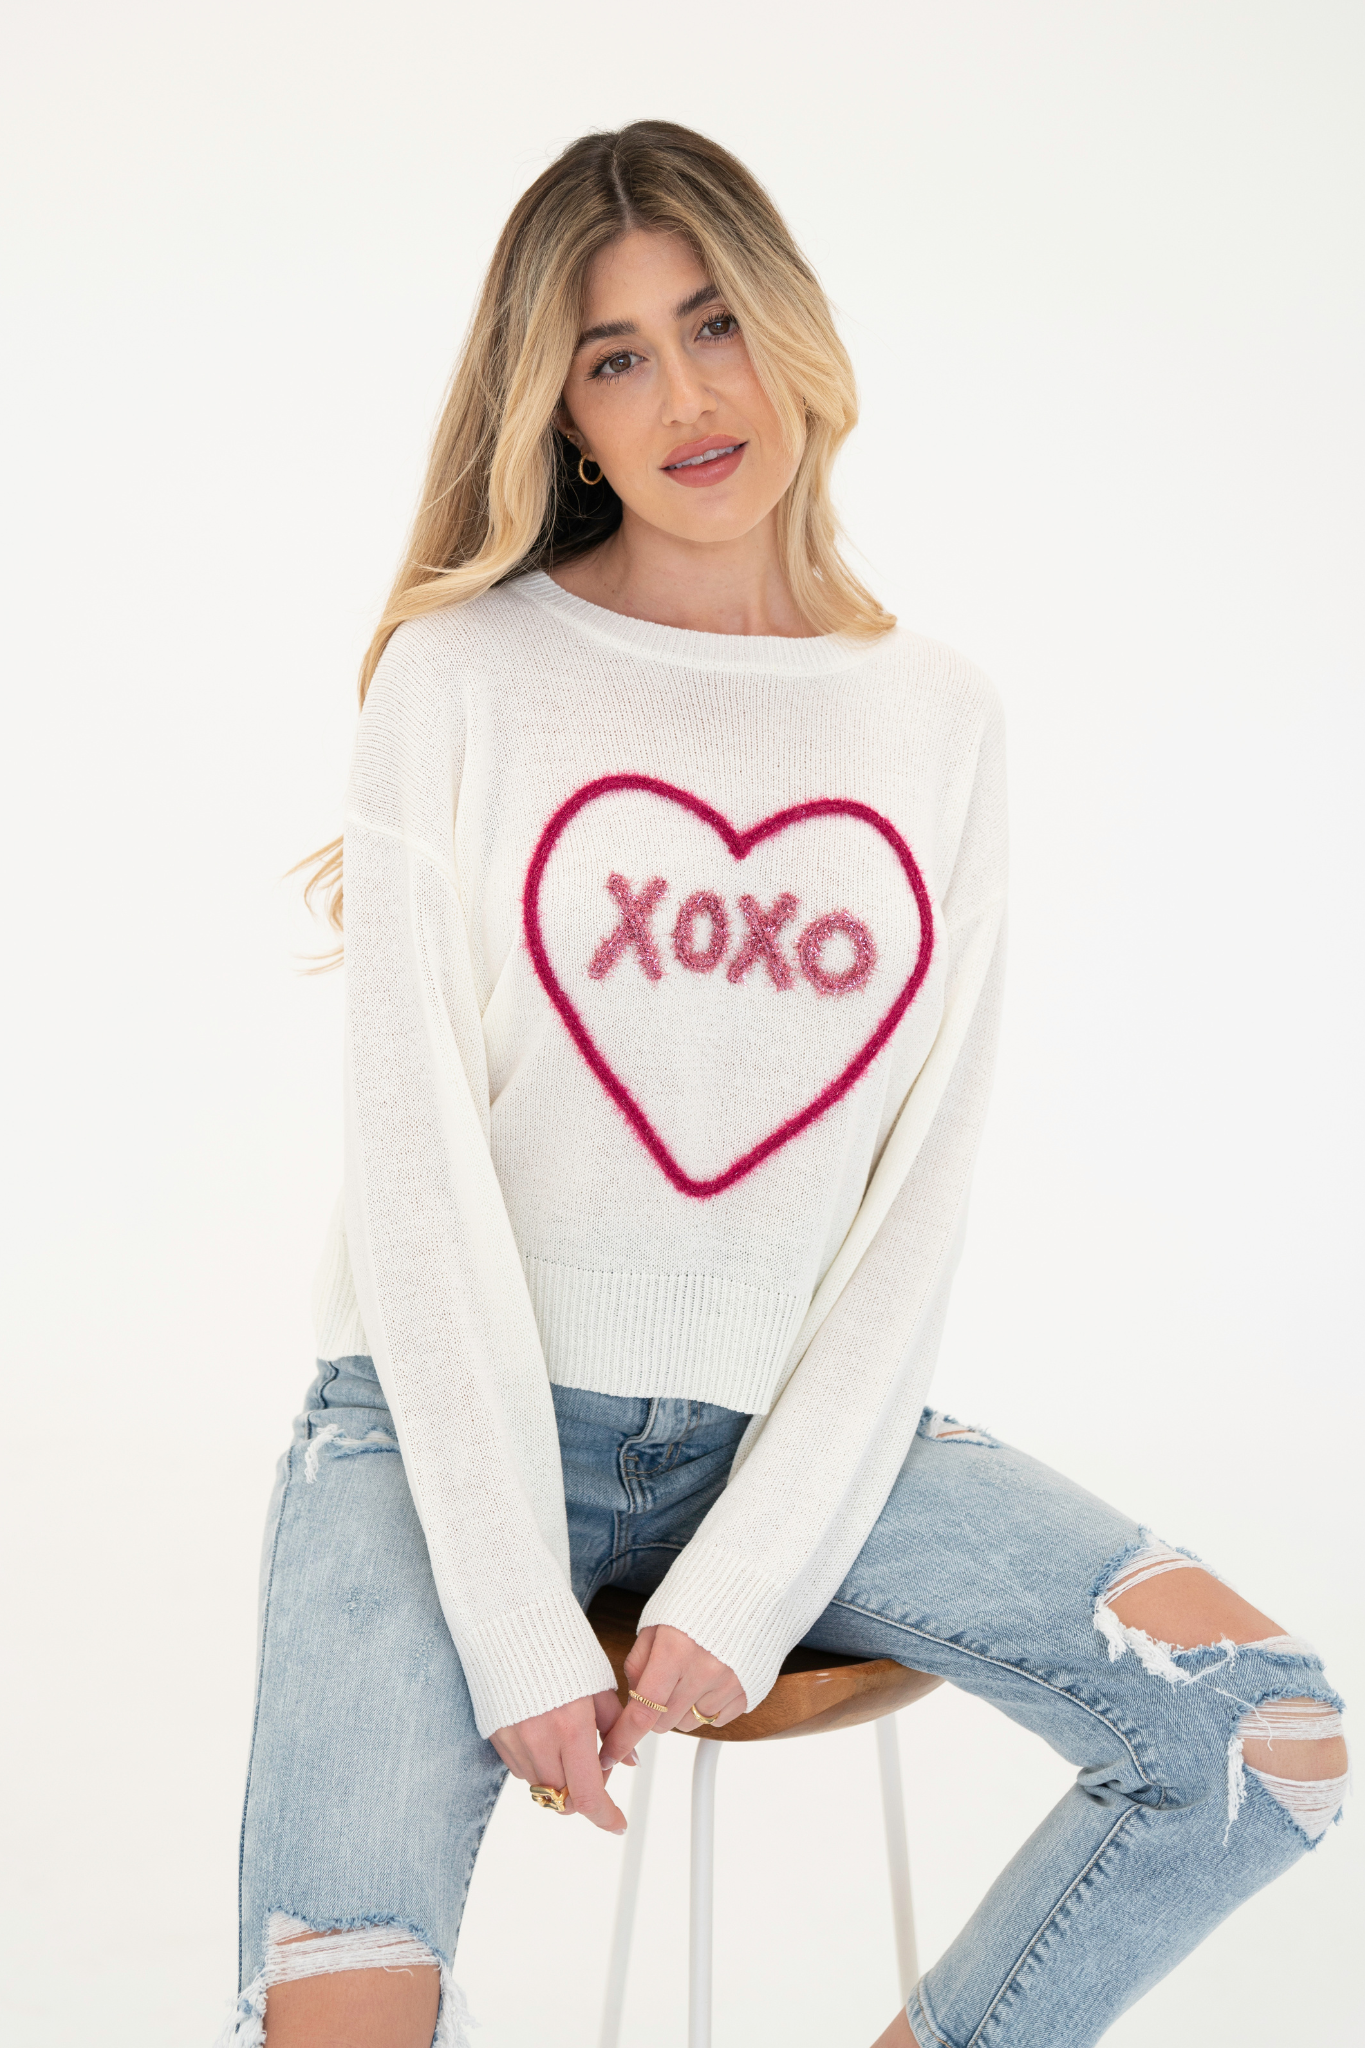 View 1 of XOXO Sweater Top, a Sweaters from Larrea Cove. Detail: This Valentine's Day, express your love with o...